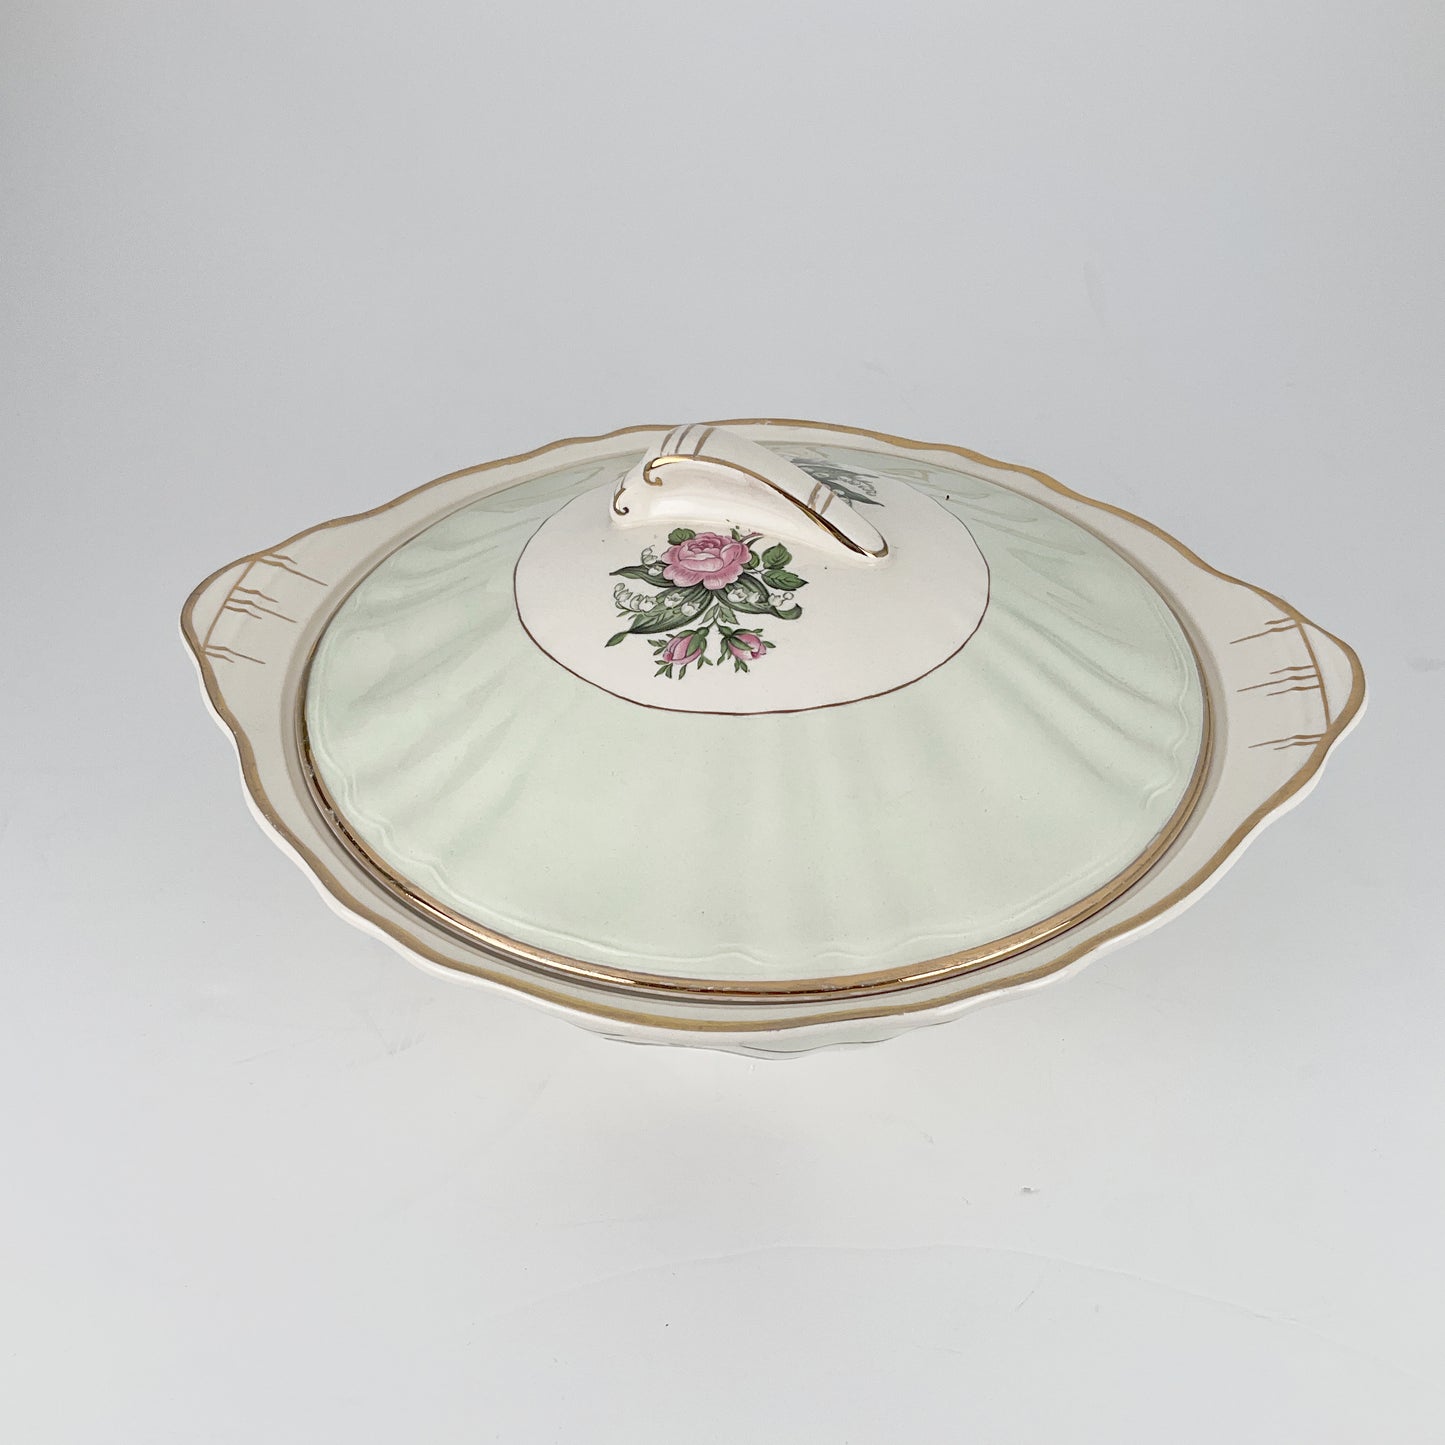 J&G Meakin - Serving Bowl with Lid